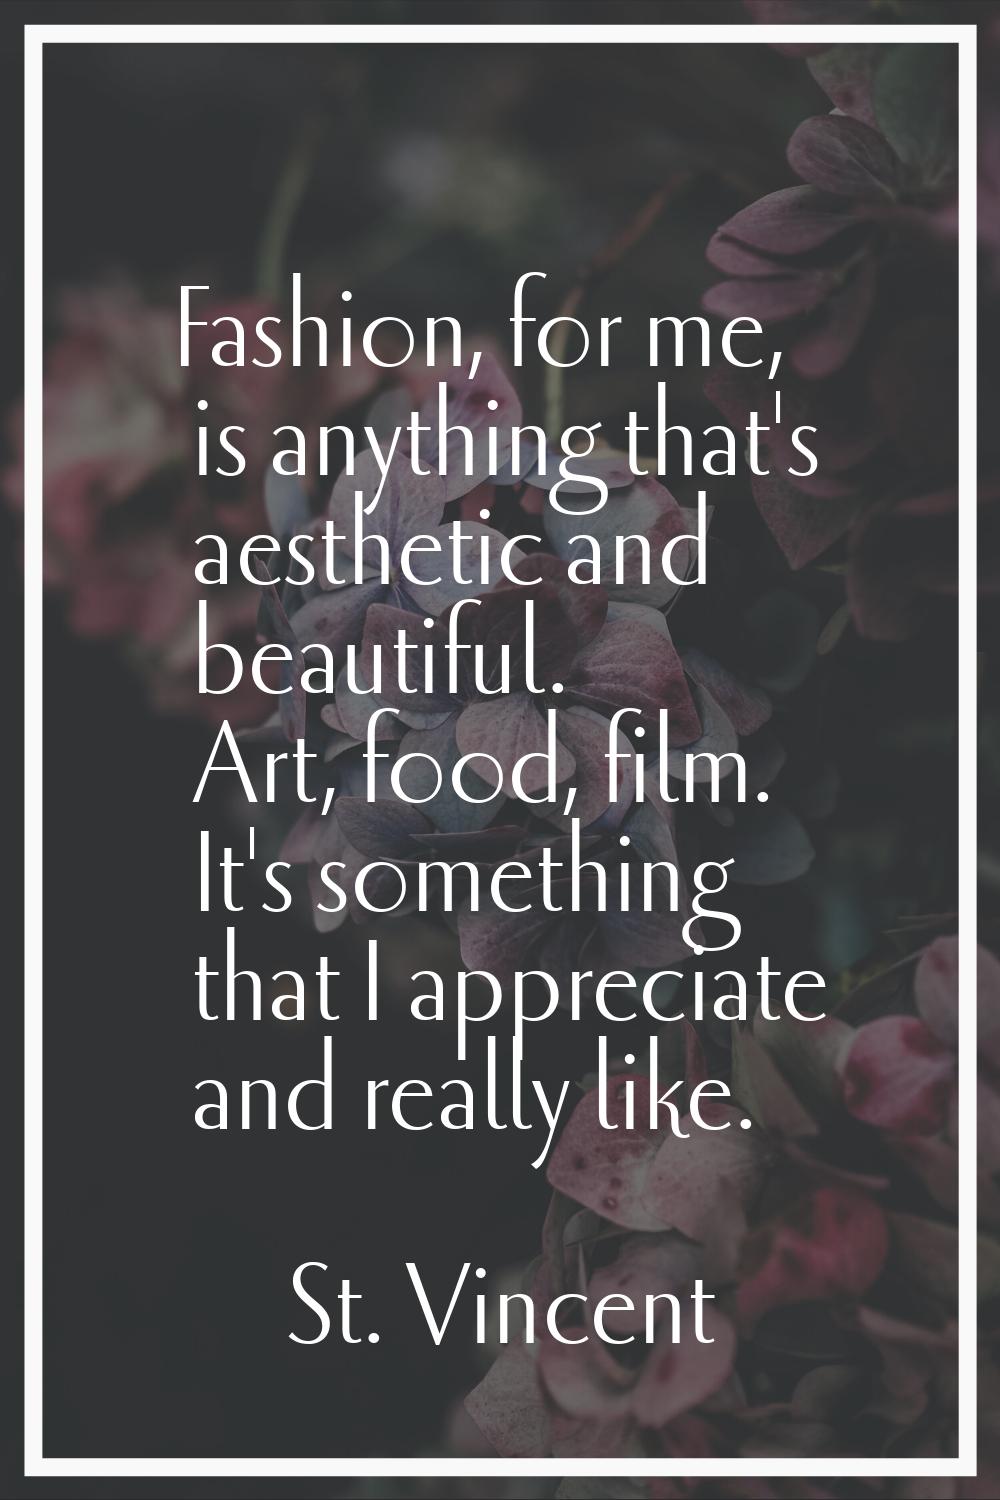 Fashion, for me, is anything that's aesthetic and beautiful. Art, food, film. It's something that I